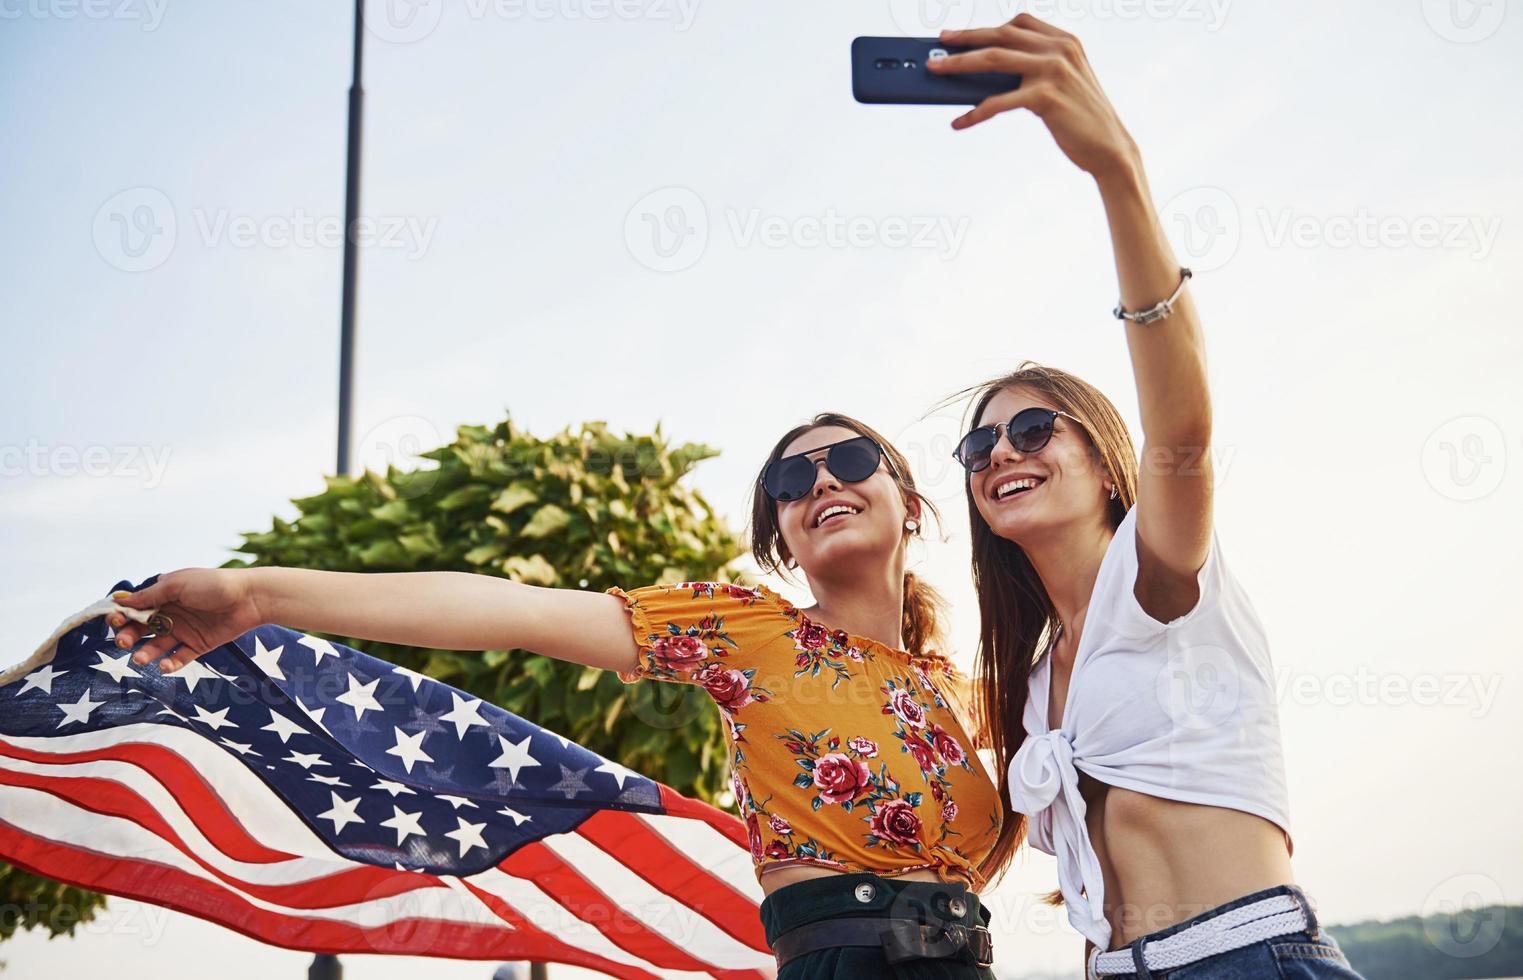 Green tree at background. Two patriotic cheerful women with USA flag in hands making selfie outdoors in park photo